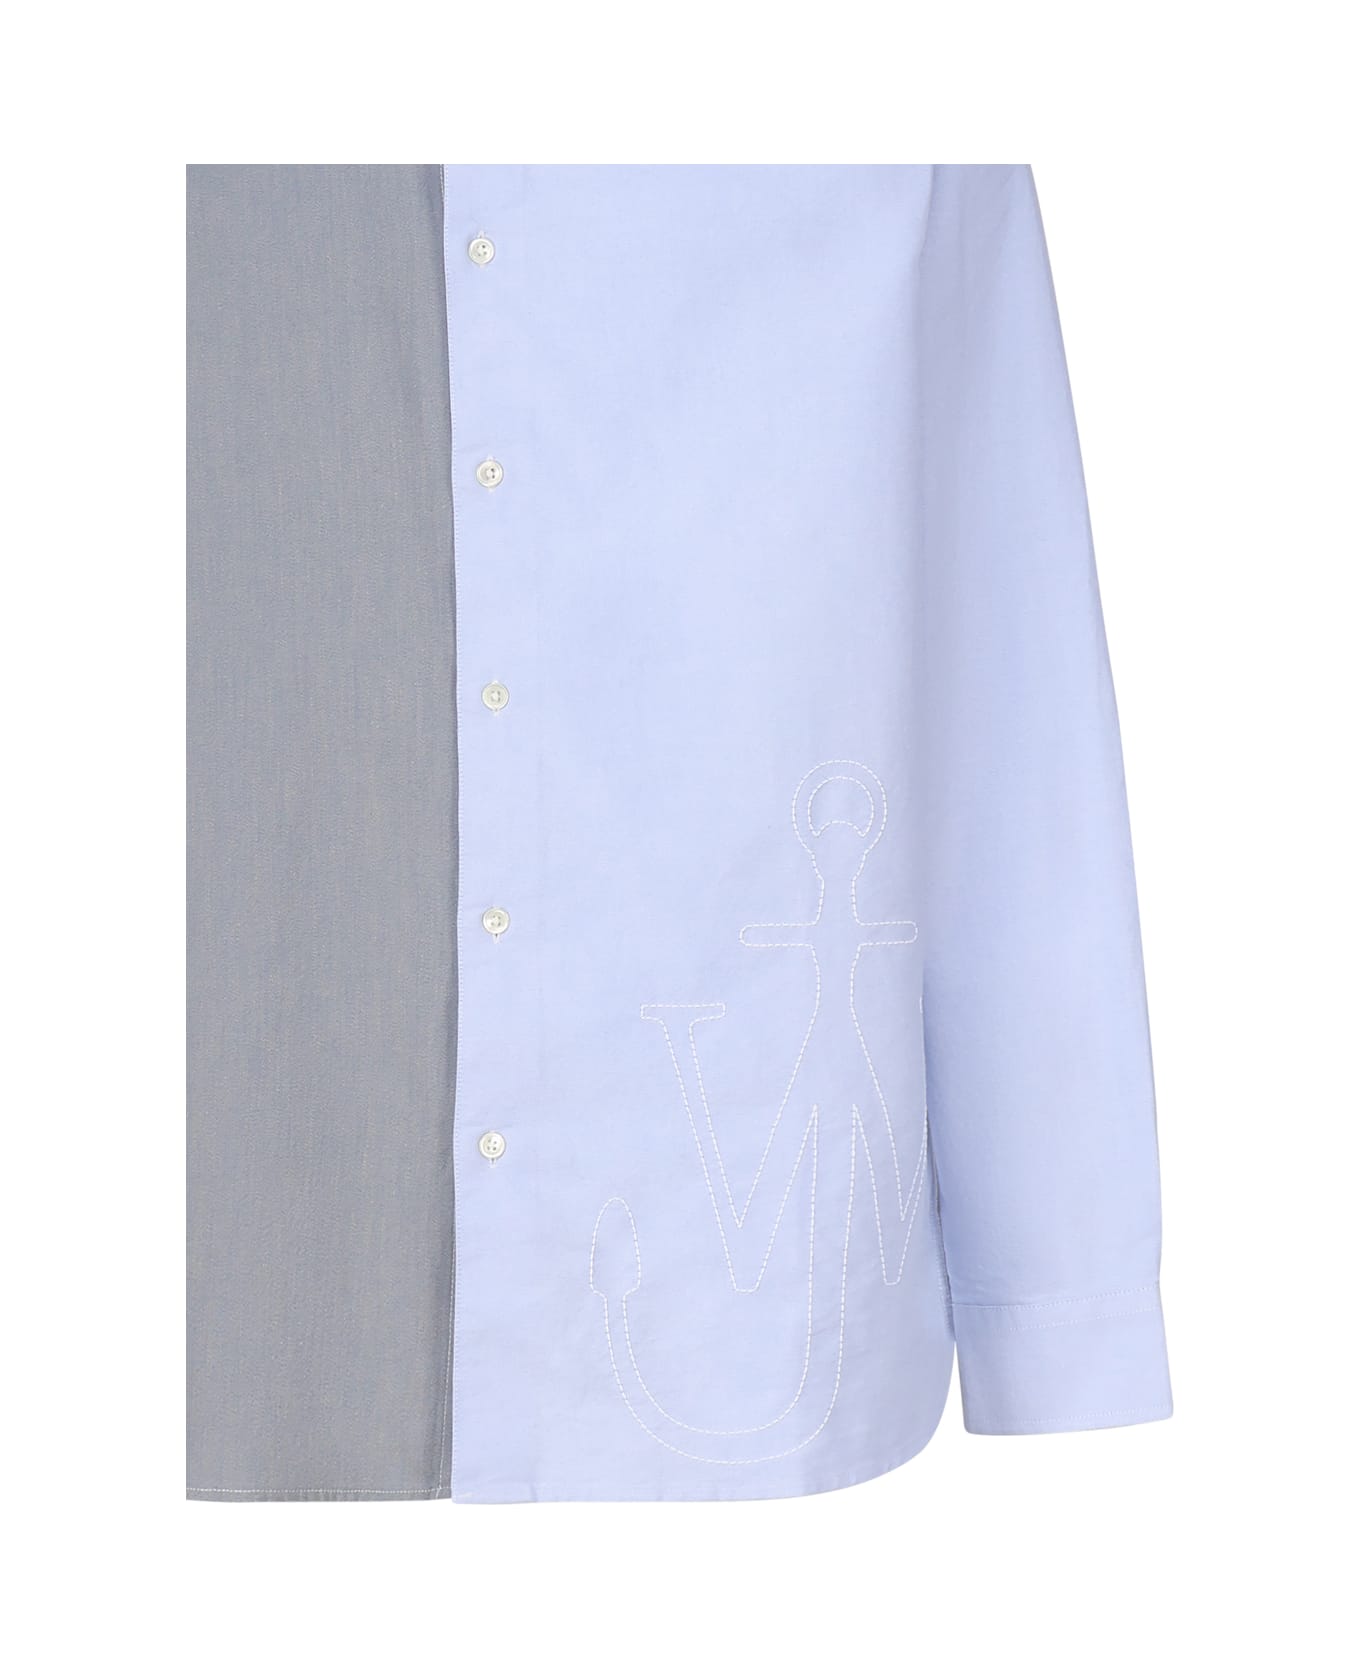 J.W. Anderson Patchwork Shirt With Anchor Embroidery - Grey, light blue シャツ